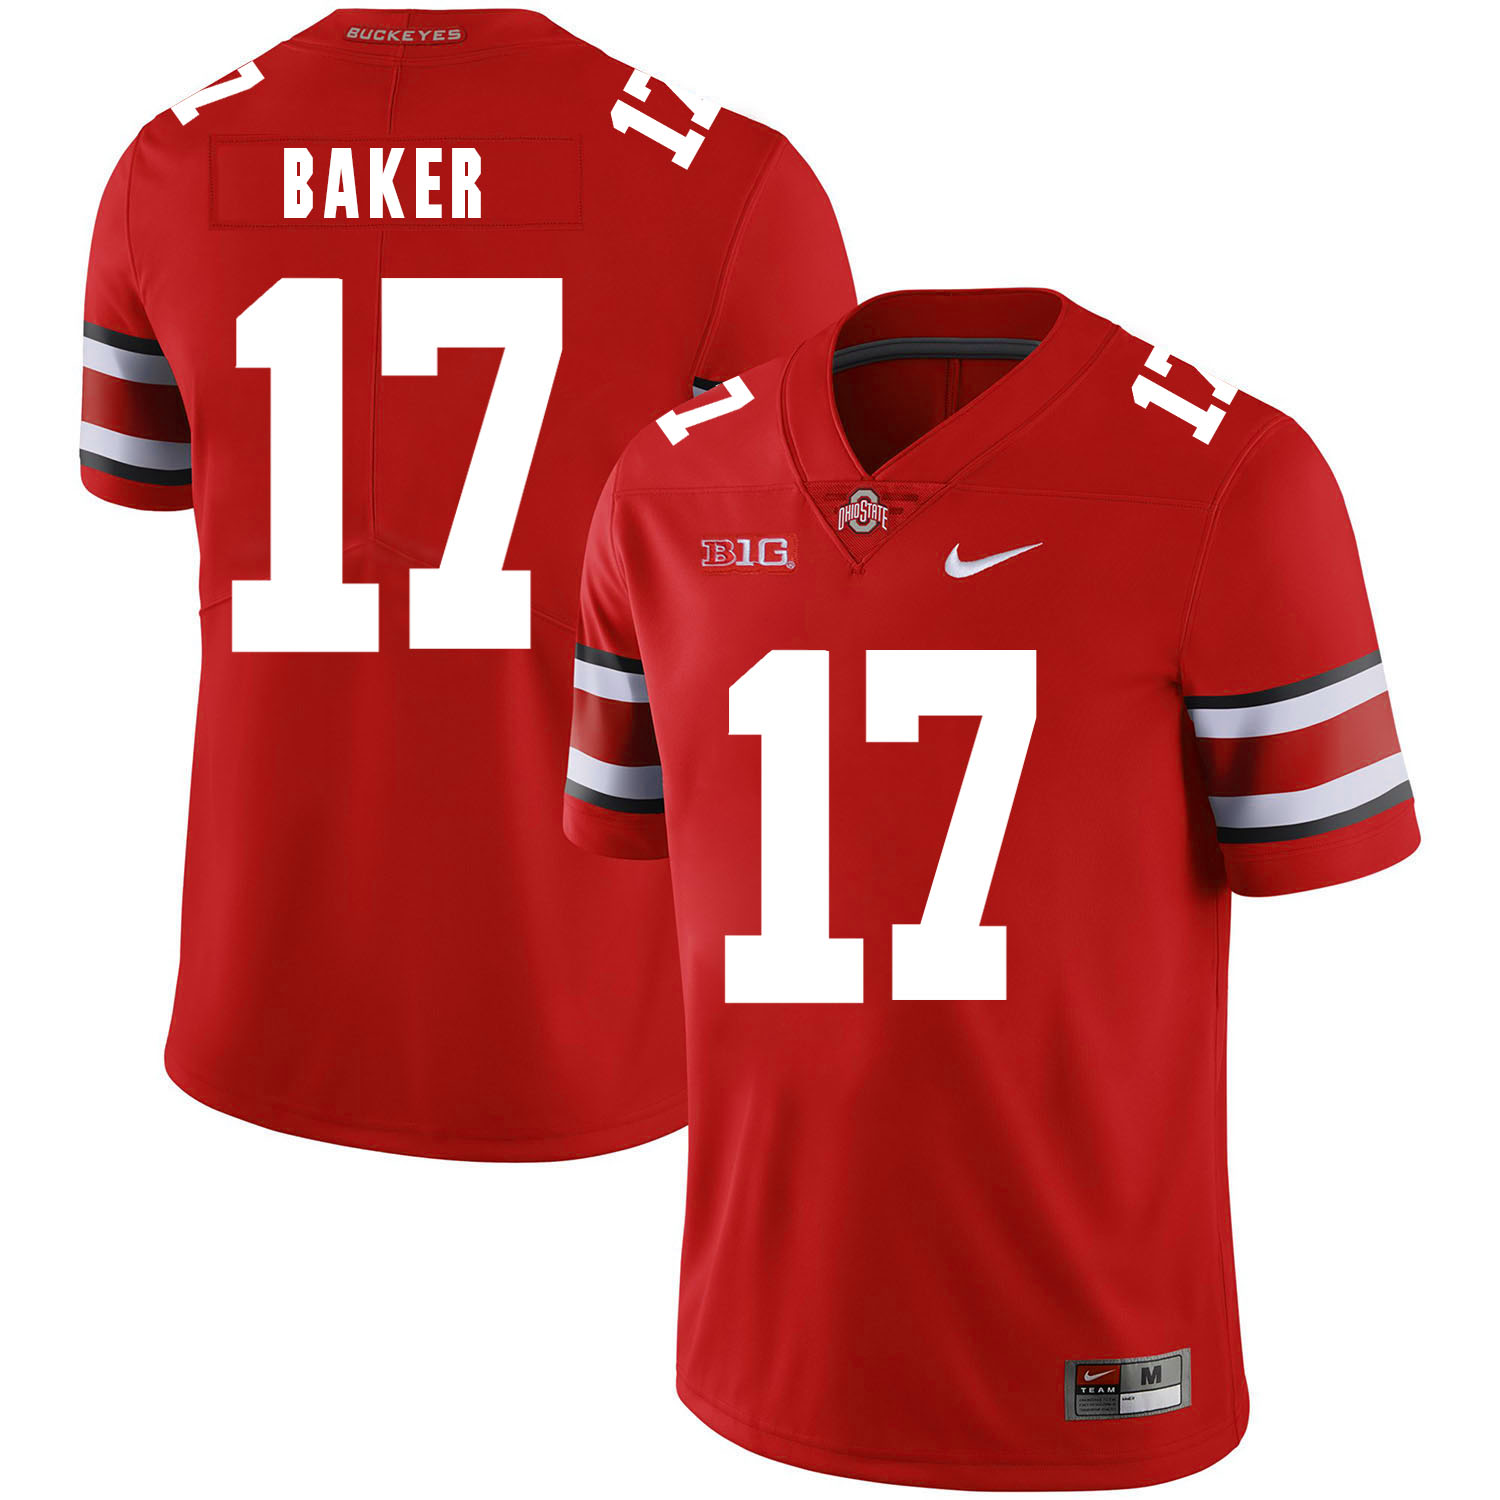 Ohio State Buckeyes 17 Jerome Baker Red Nike College Football Jersey